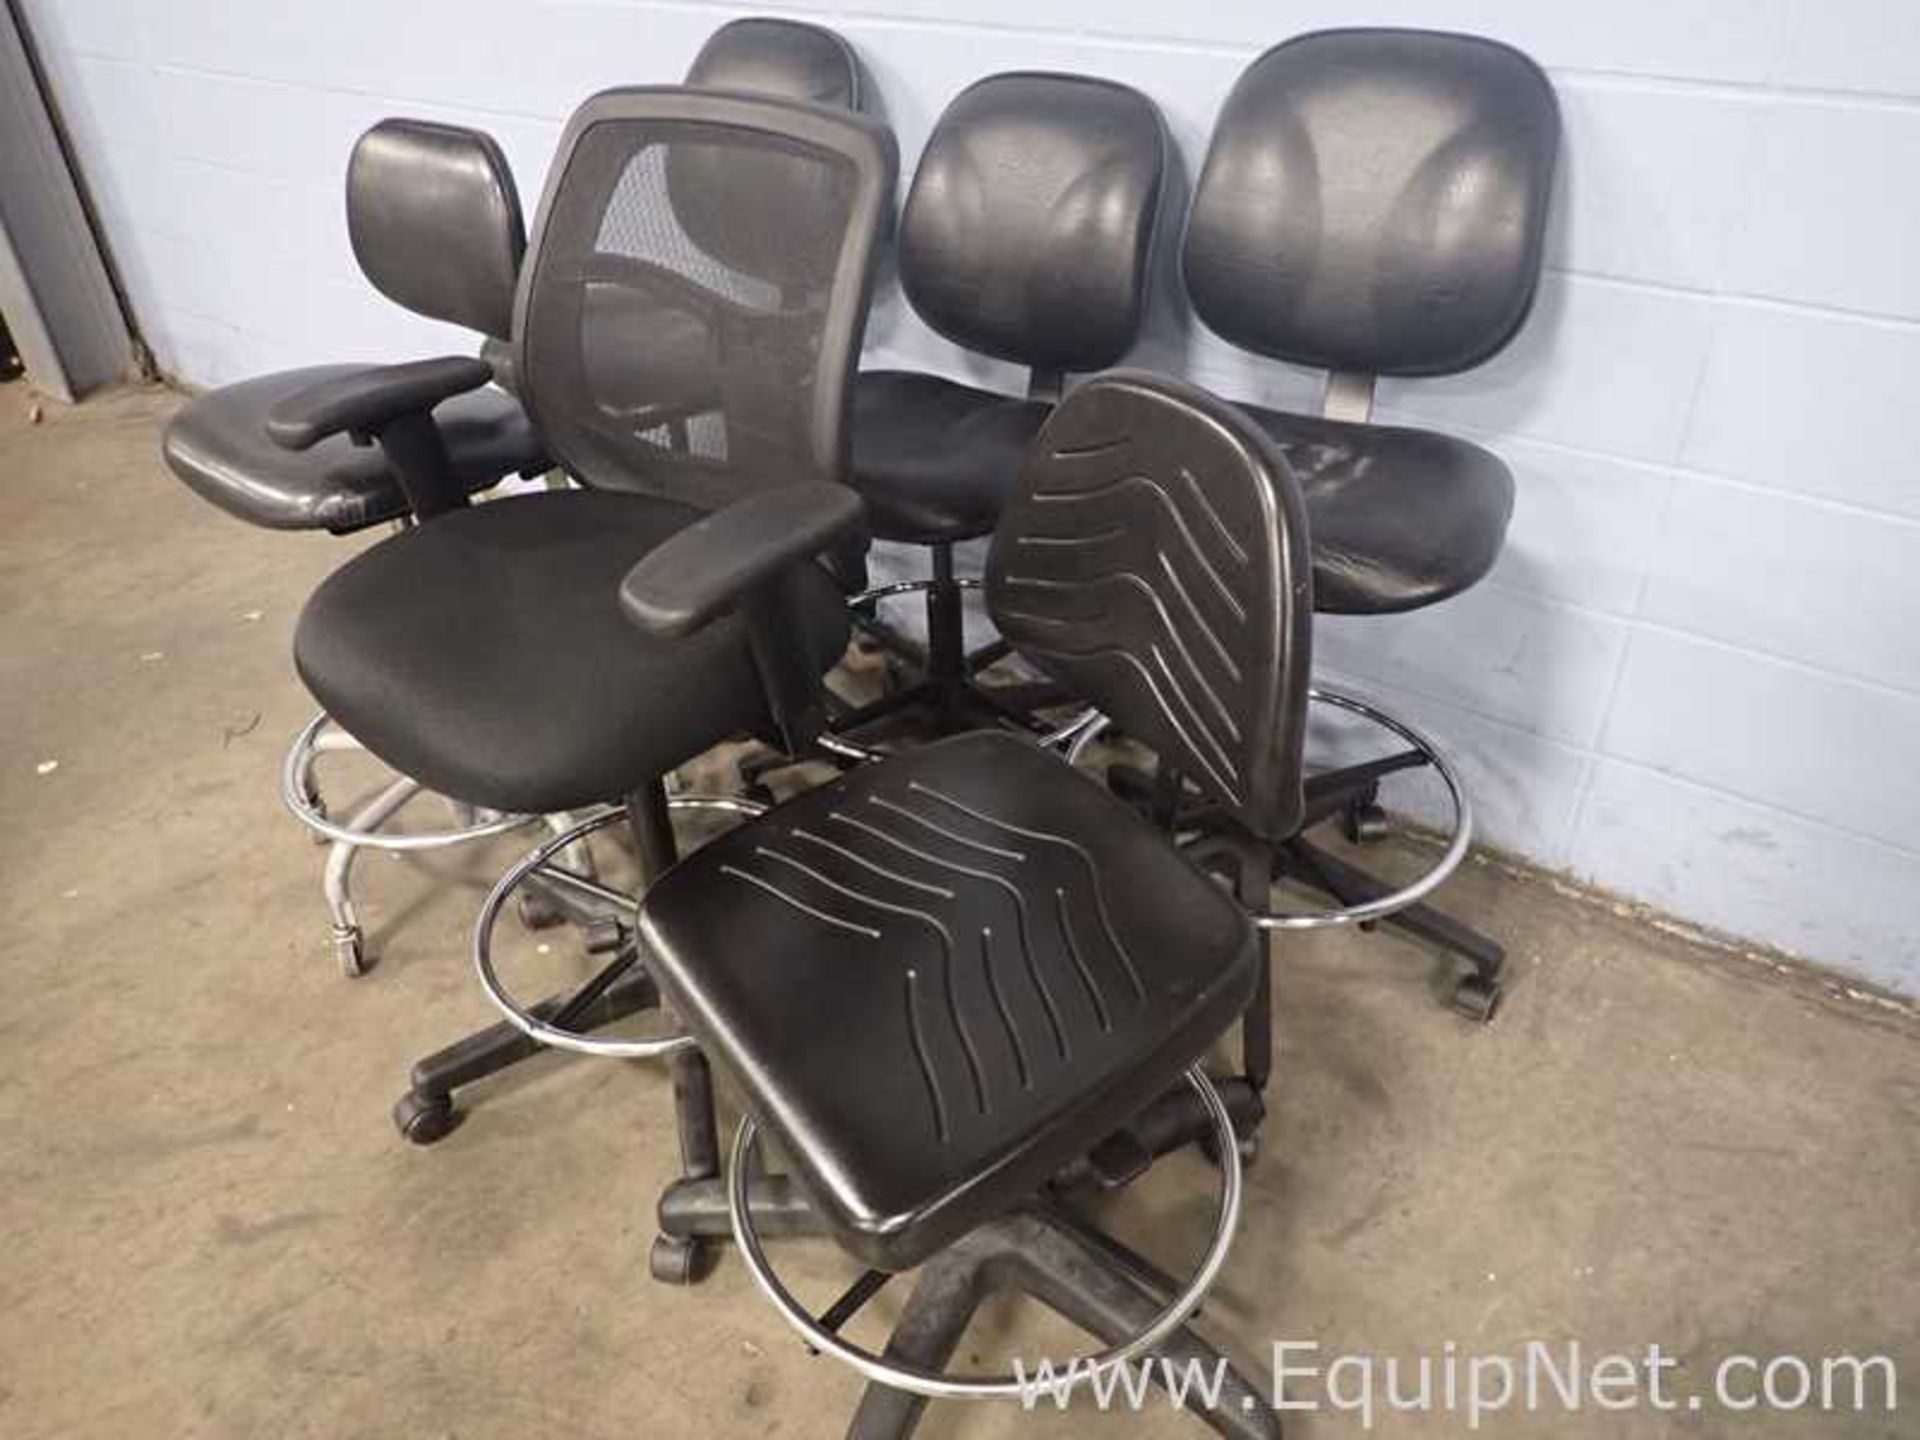 Lot of 6 Black office Chairs